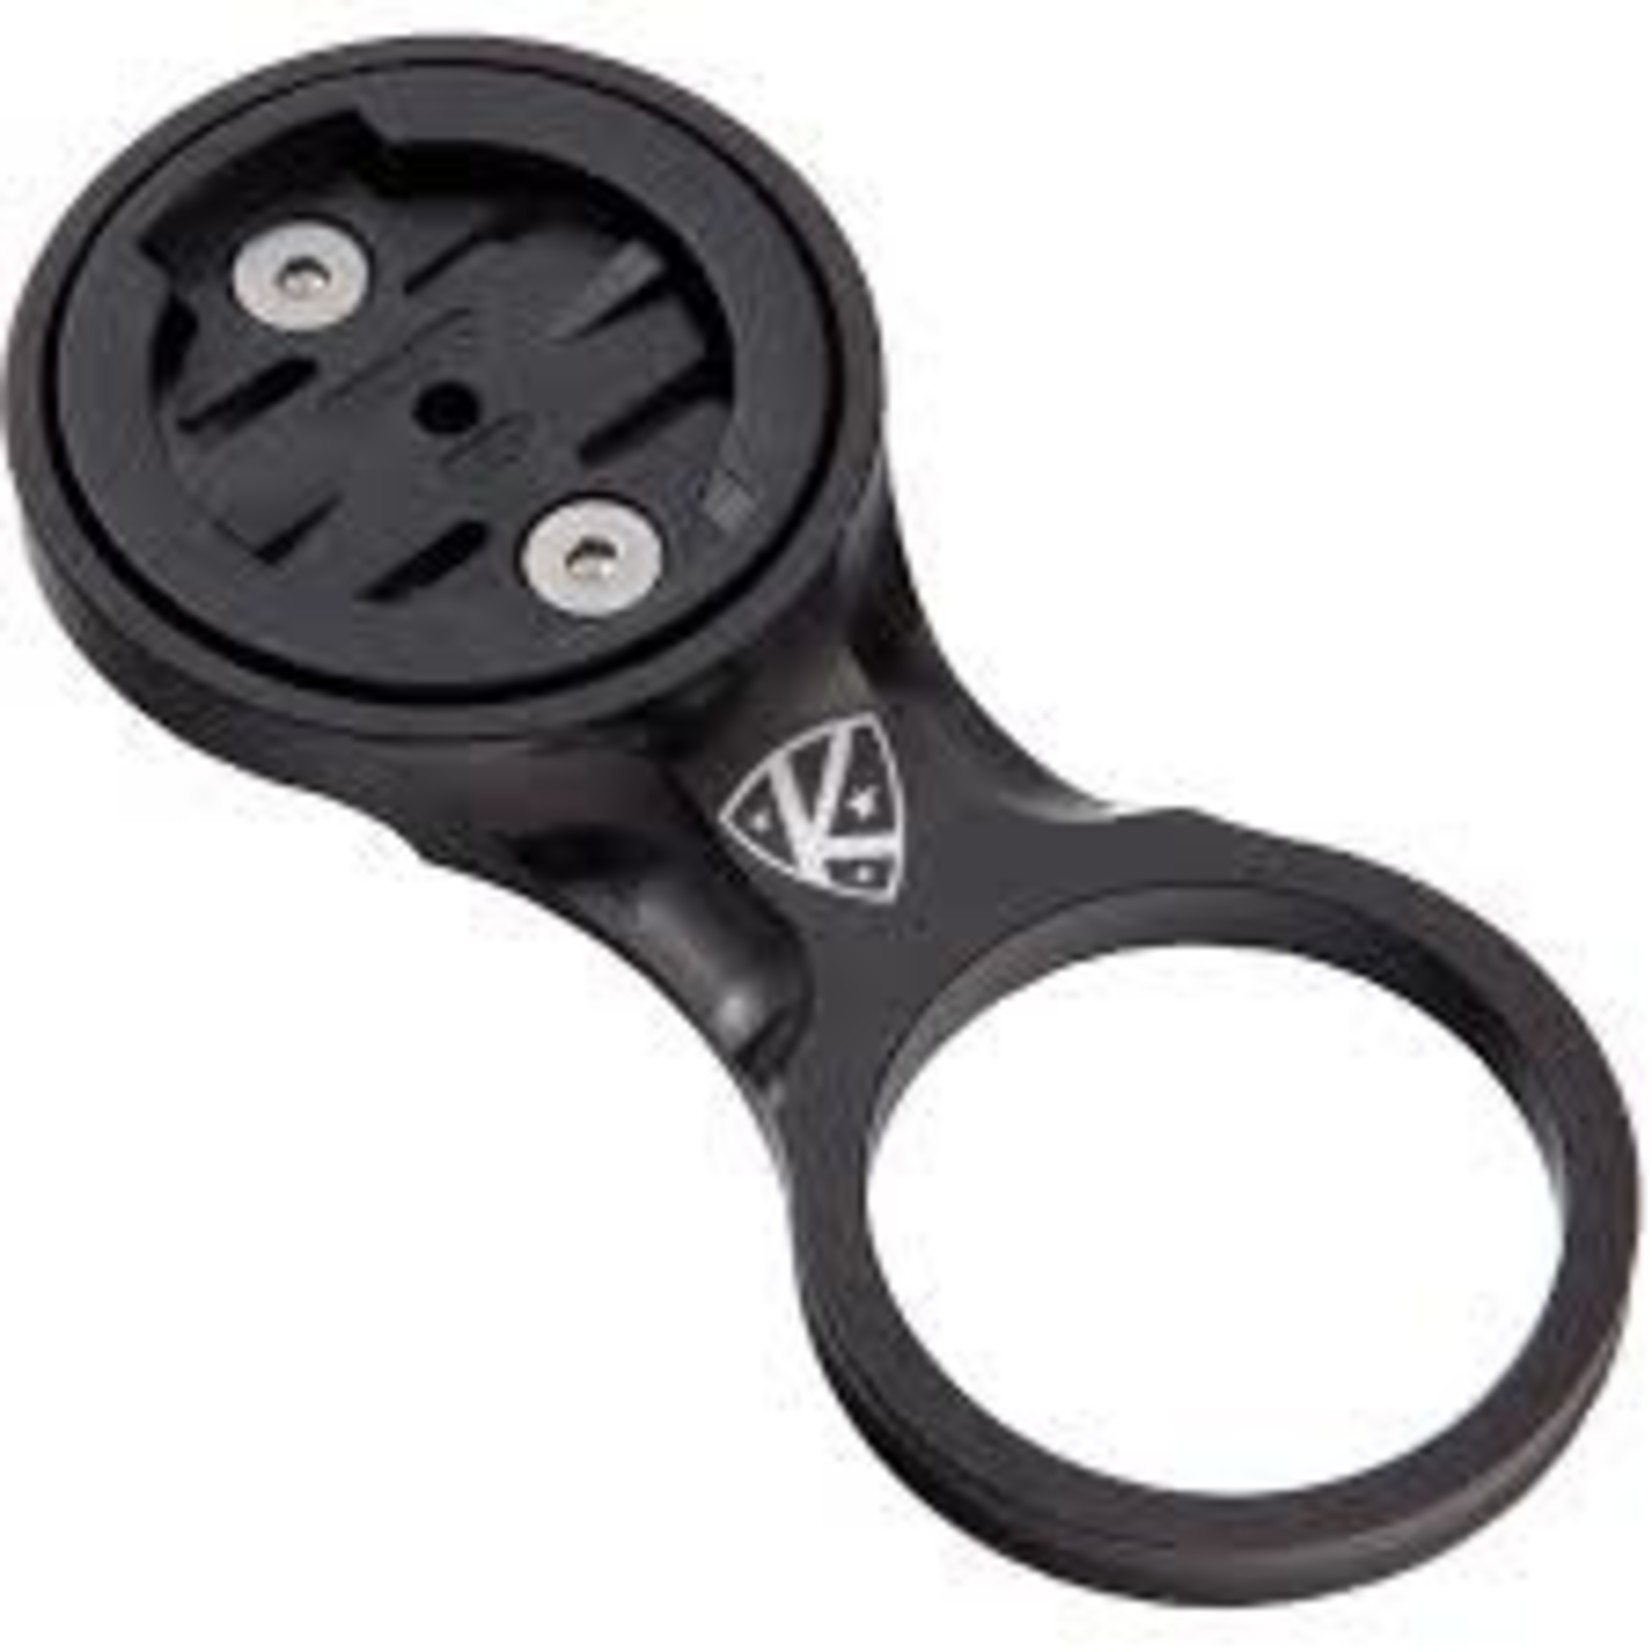 K-Edge Computer K-EDGE Fixed Stem Mount for Wahoo Bolt and ELEMNT Computers: Black